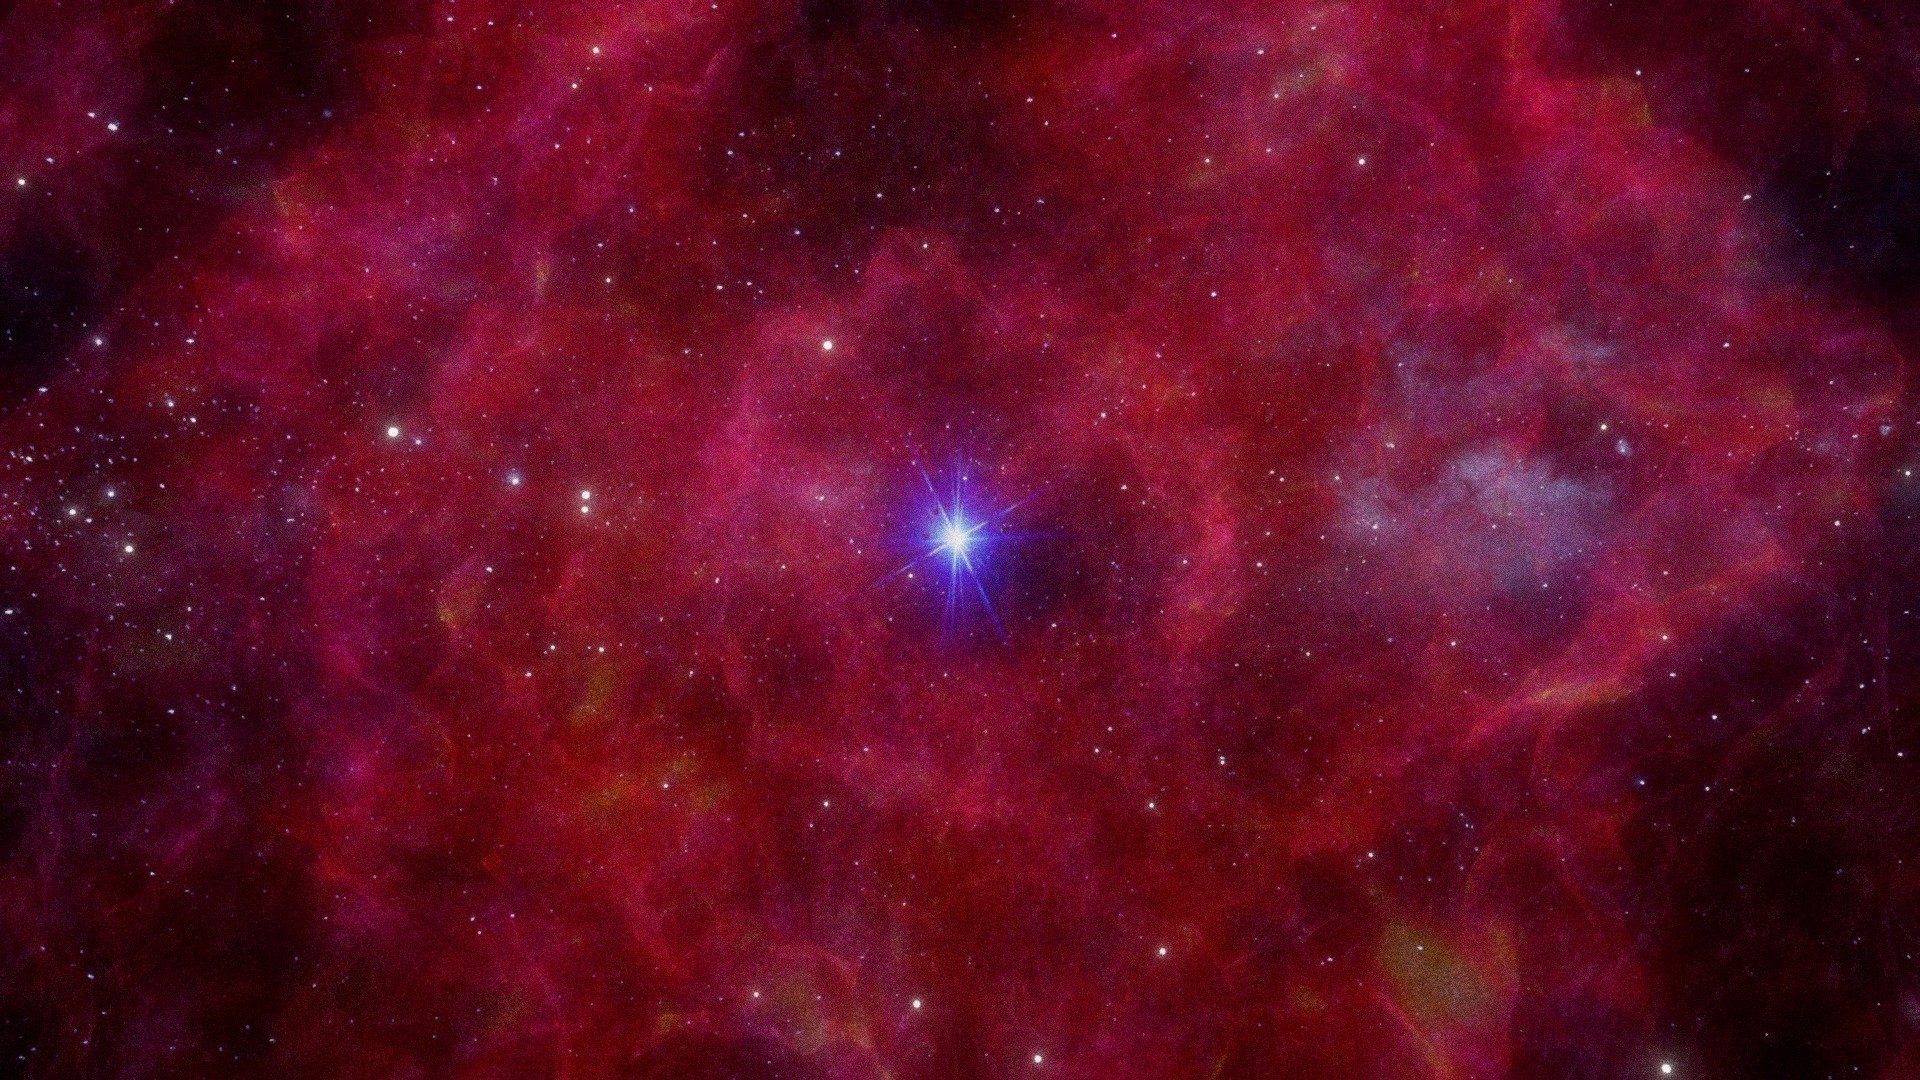 Artist's impression of a class of massive stars (masses &gt; 10 solar masses) known as Wolf-Rayet (WR) stars, named after the astronomers Charles Wolf and Georges Rayet who first classified these objects. WR stars are evolved, very massive stars that have completely lost their outer hydrogen envelope and are now fusing helium or heavier elements into their bright core with luminosities hundreds of thouands to millions of times the luminosity of our Sun. WR stars are rare because they are a relatively short phase in the life of the most massive stars. They are believed to end in dramatic supernova explosions. Most of them are surrounded by a dense expanding nebula made of gas continuously ejected from the star. The nebulae have a vast variaty of morphologies, so that a classification is not possible. The one shown here is reminiscent of the one observed in WR-124, a WR star in the constellation Sagitta.  Image credit: NASA/Hubble 3d model